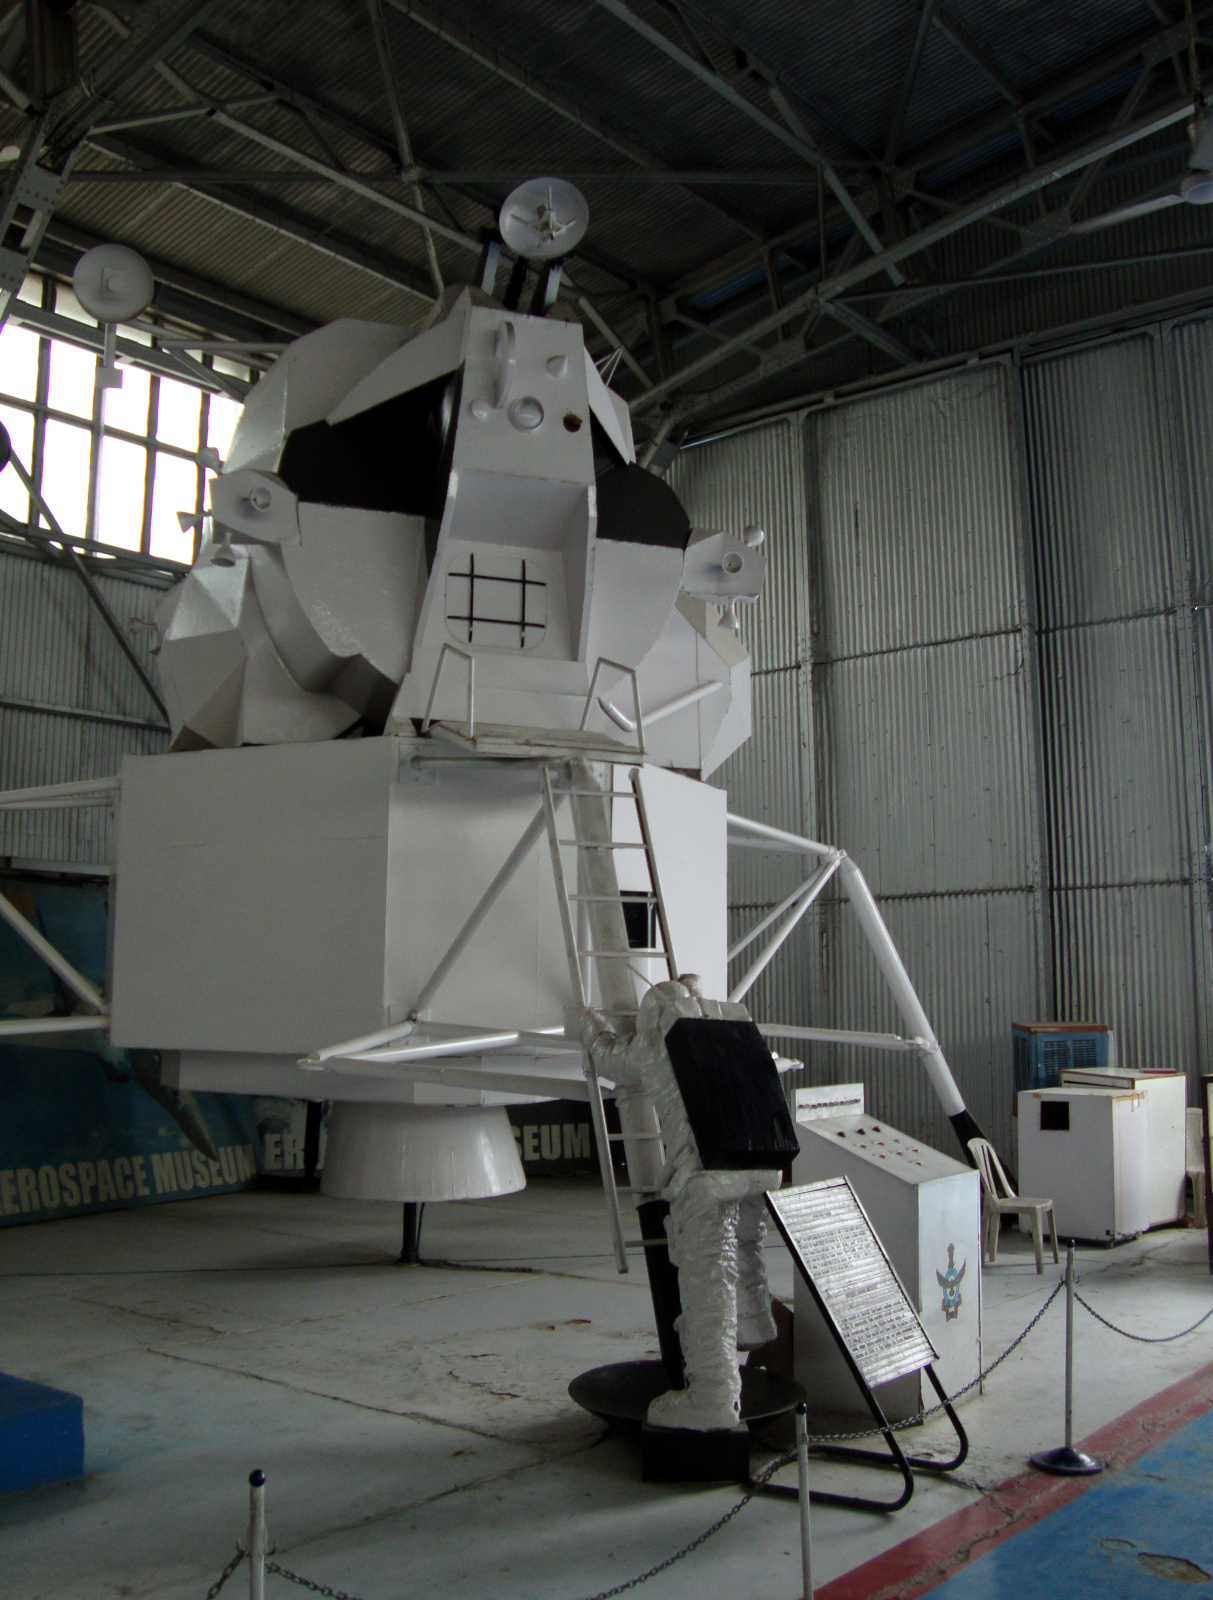 The Lunar Module and astronaut at the IAF Museum.